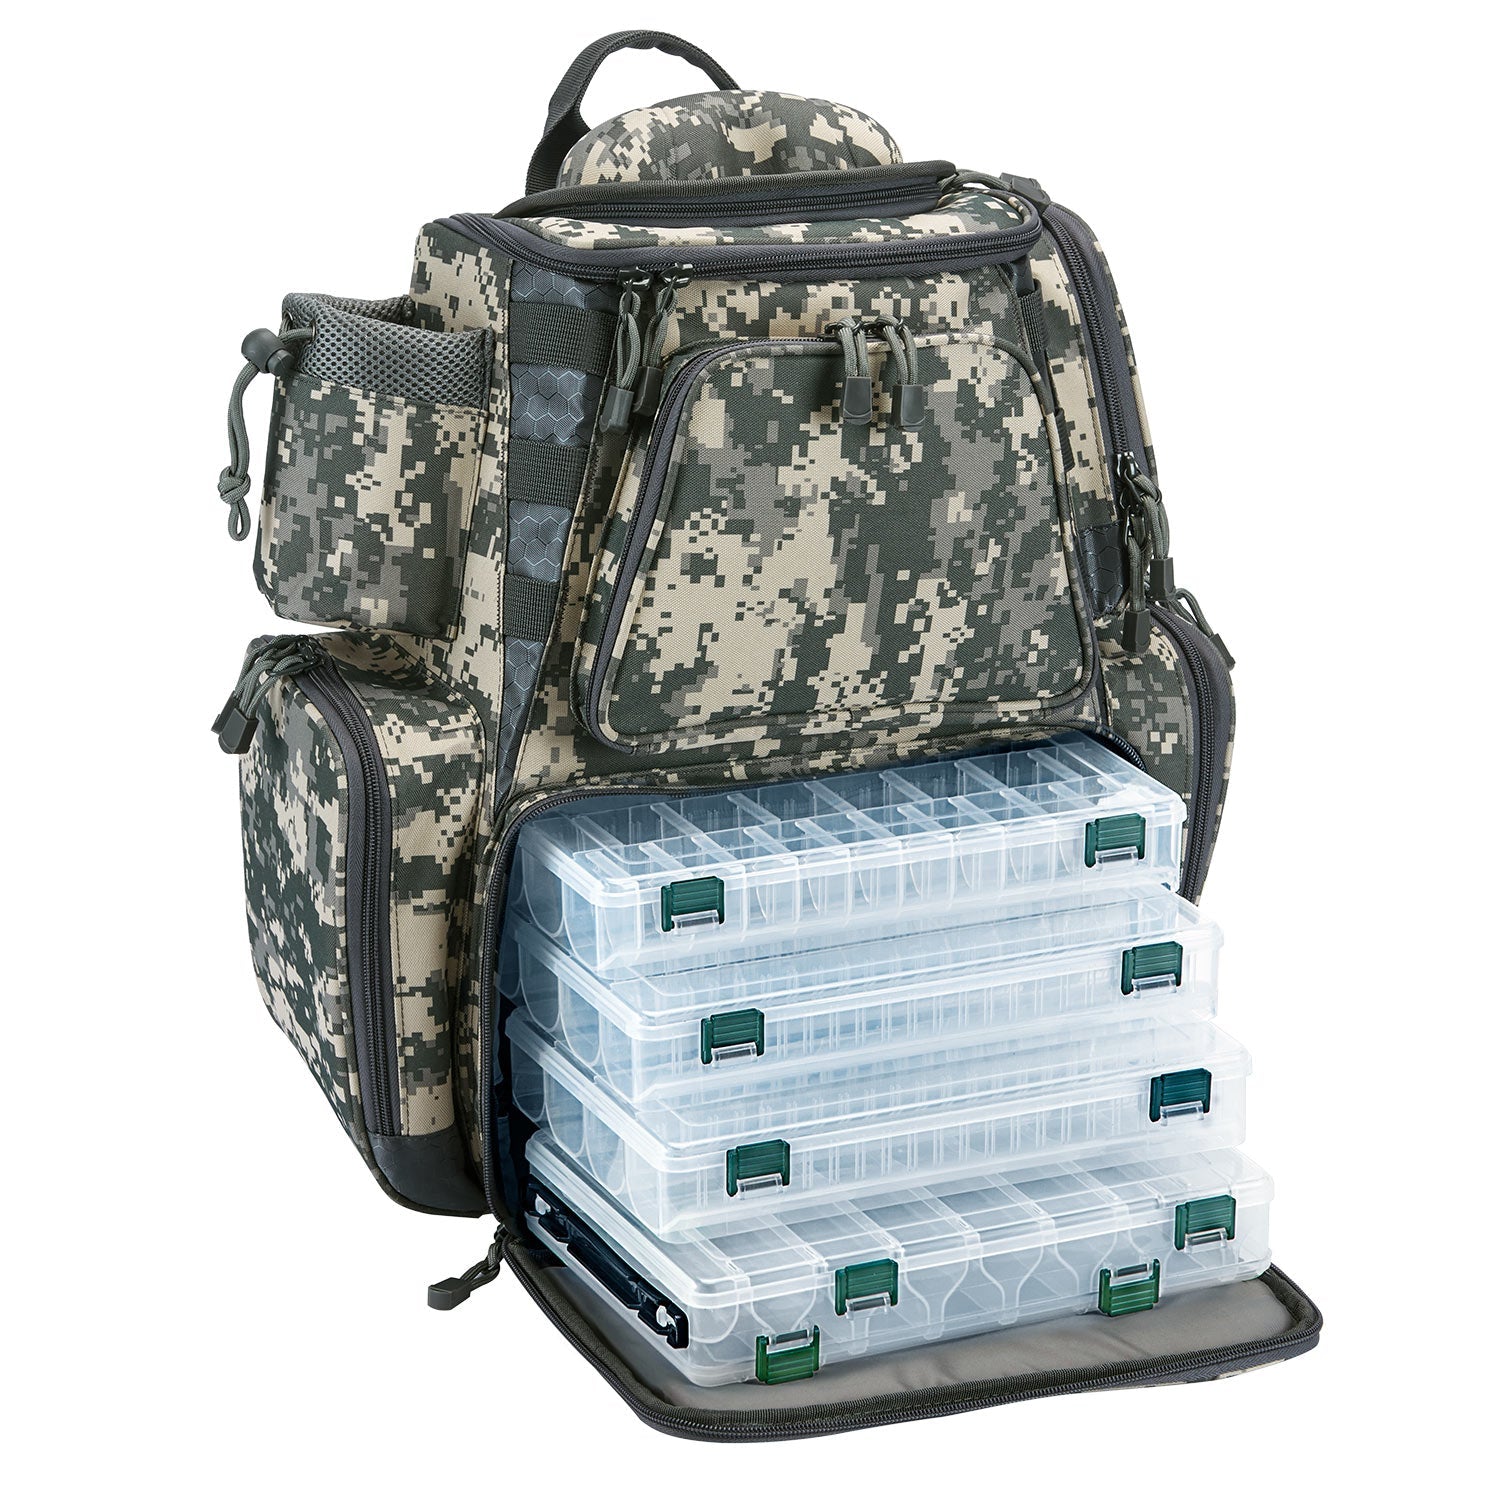 Piscifun® Fishing Tackle Backpack With 4 Trays Fishing Gear Bag Sale, Digital Camo Backpack with Four Trays